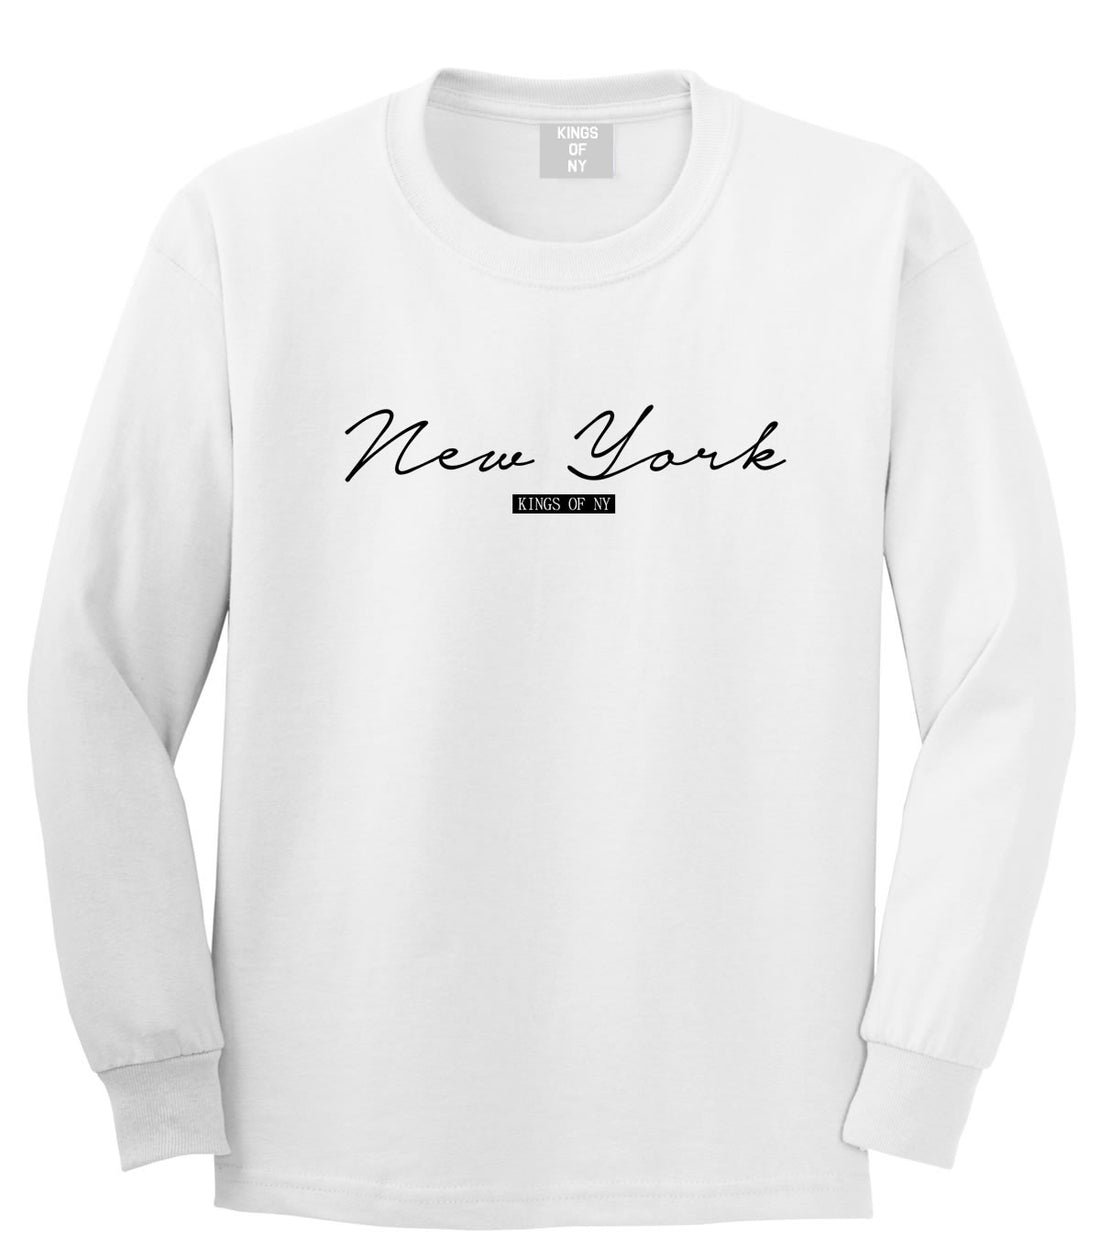 Kings Of NY New York Script Typography Long Sleeve T-Shirt in White